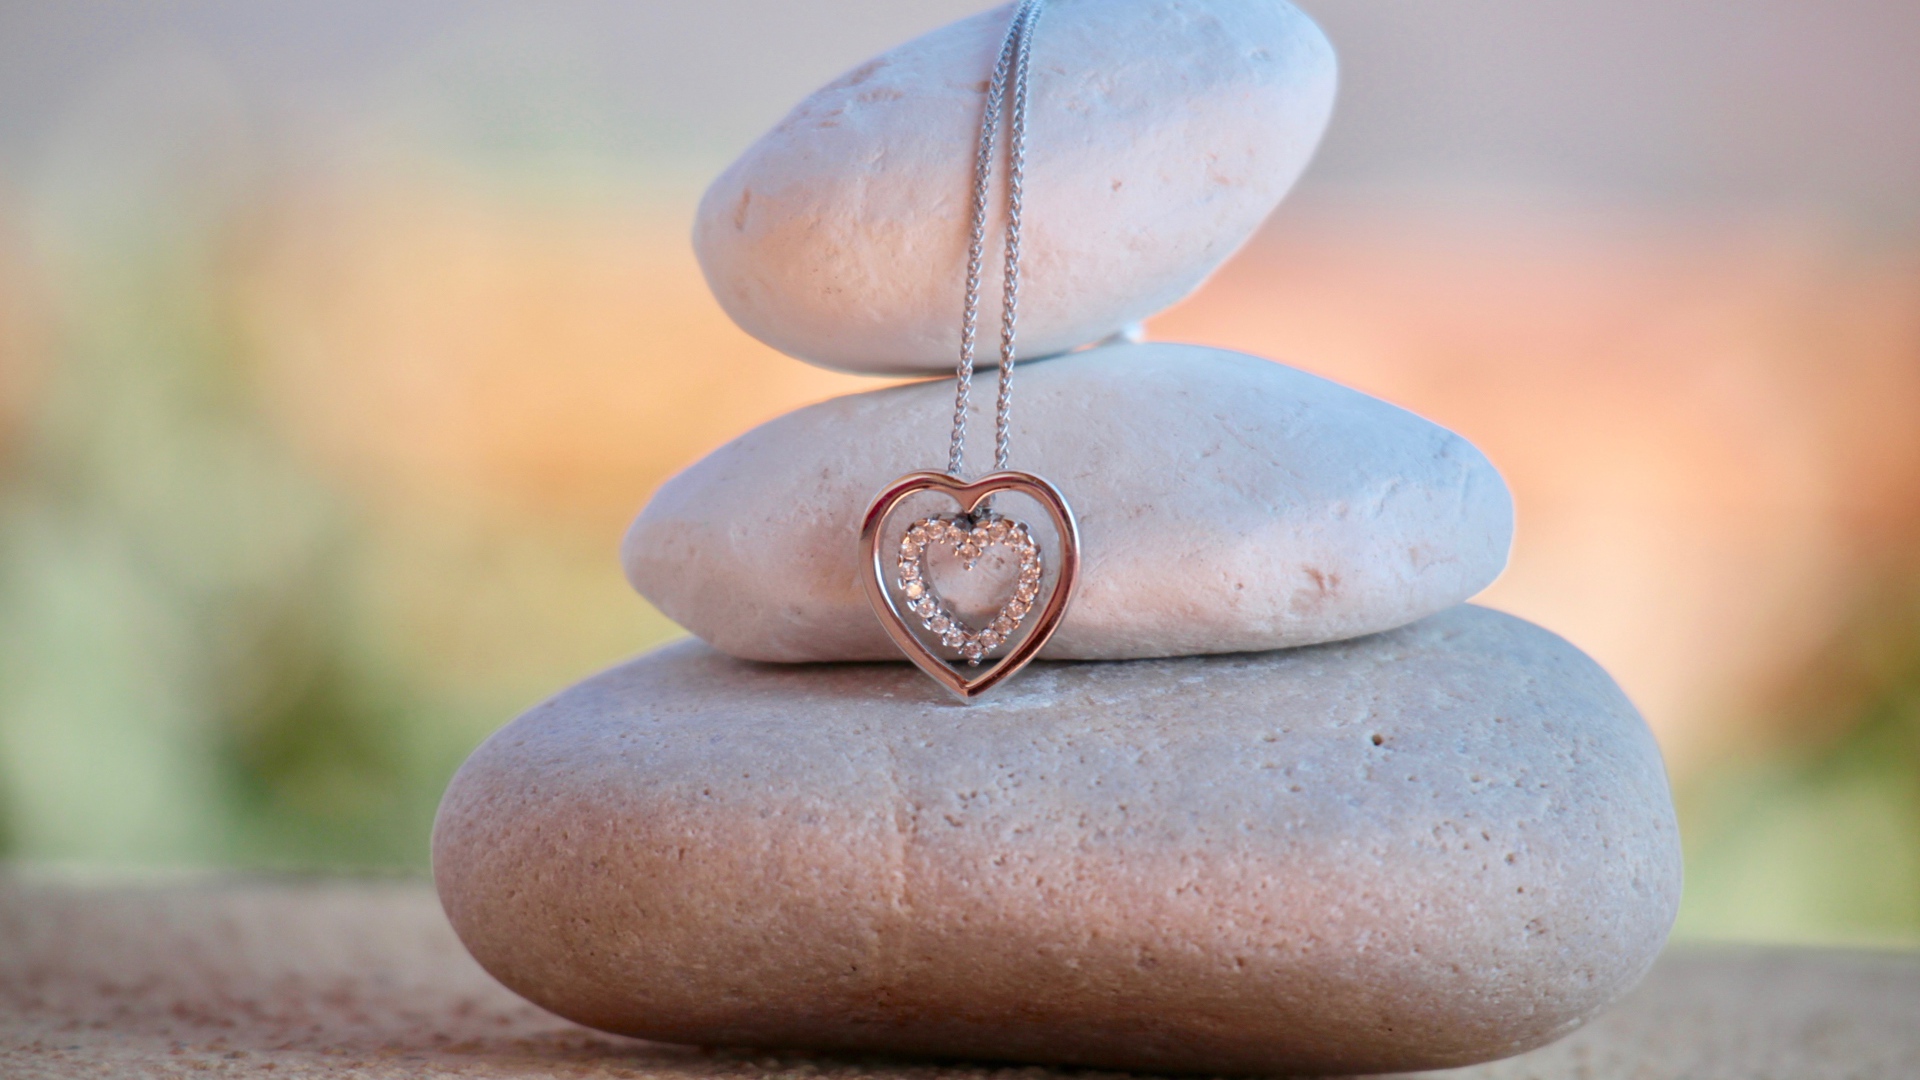 Heart shaped gold pendant hanging on stones